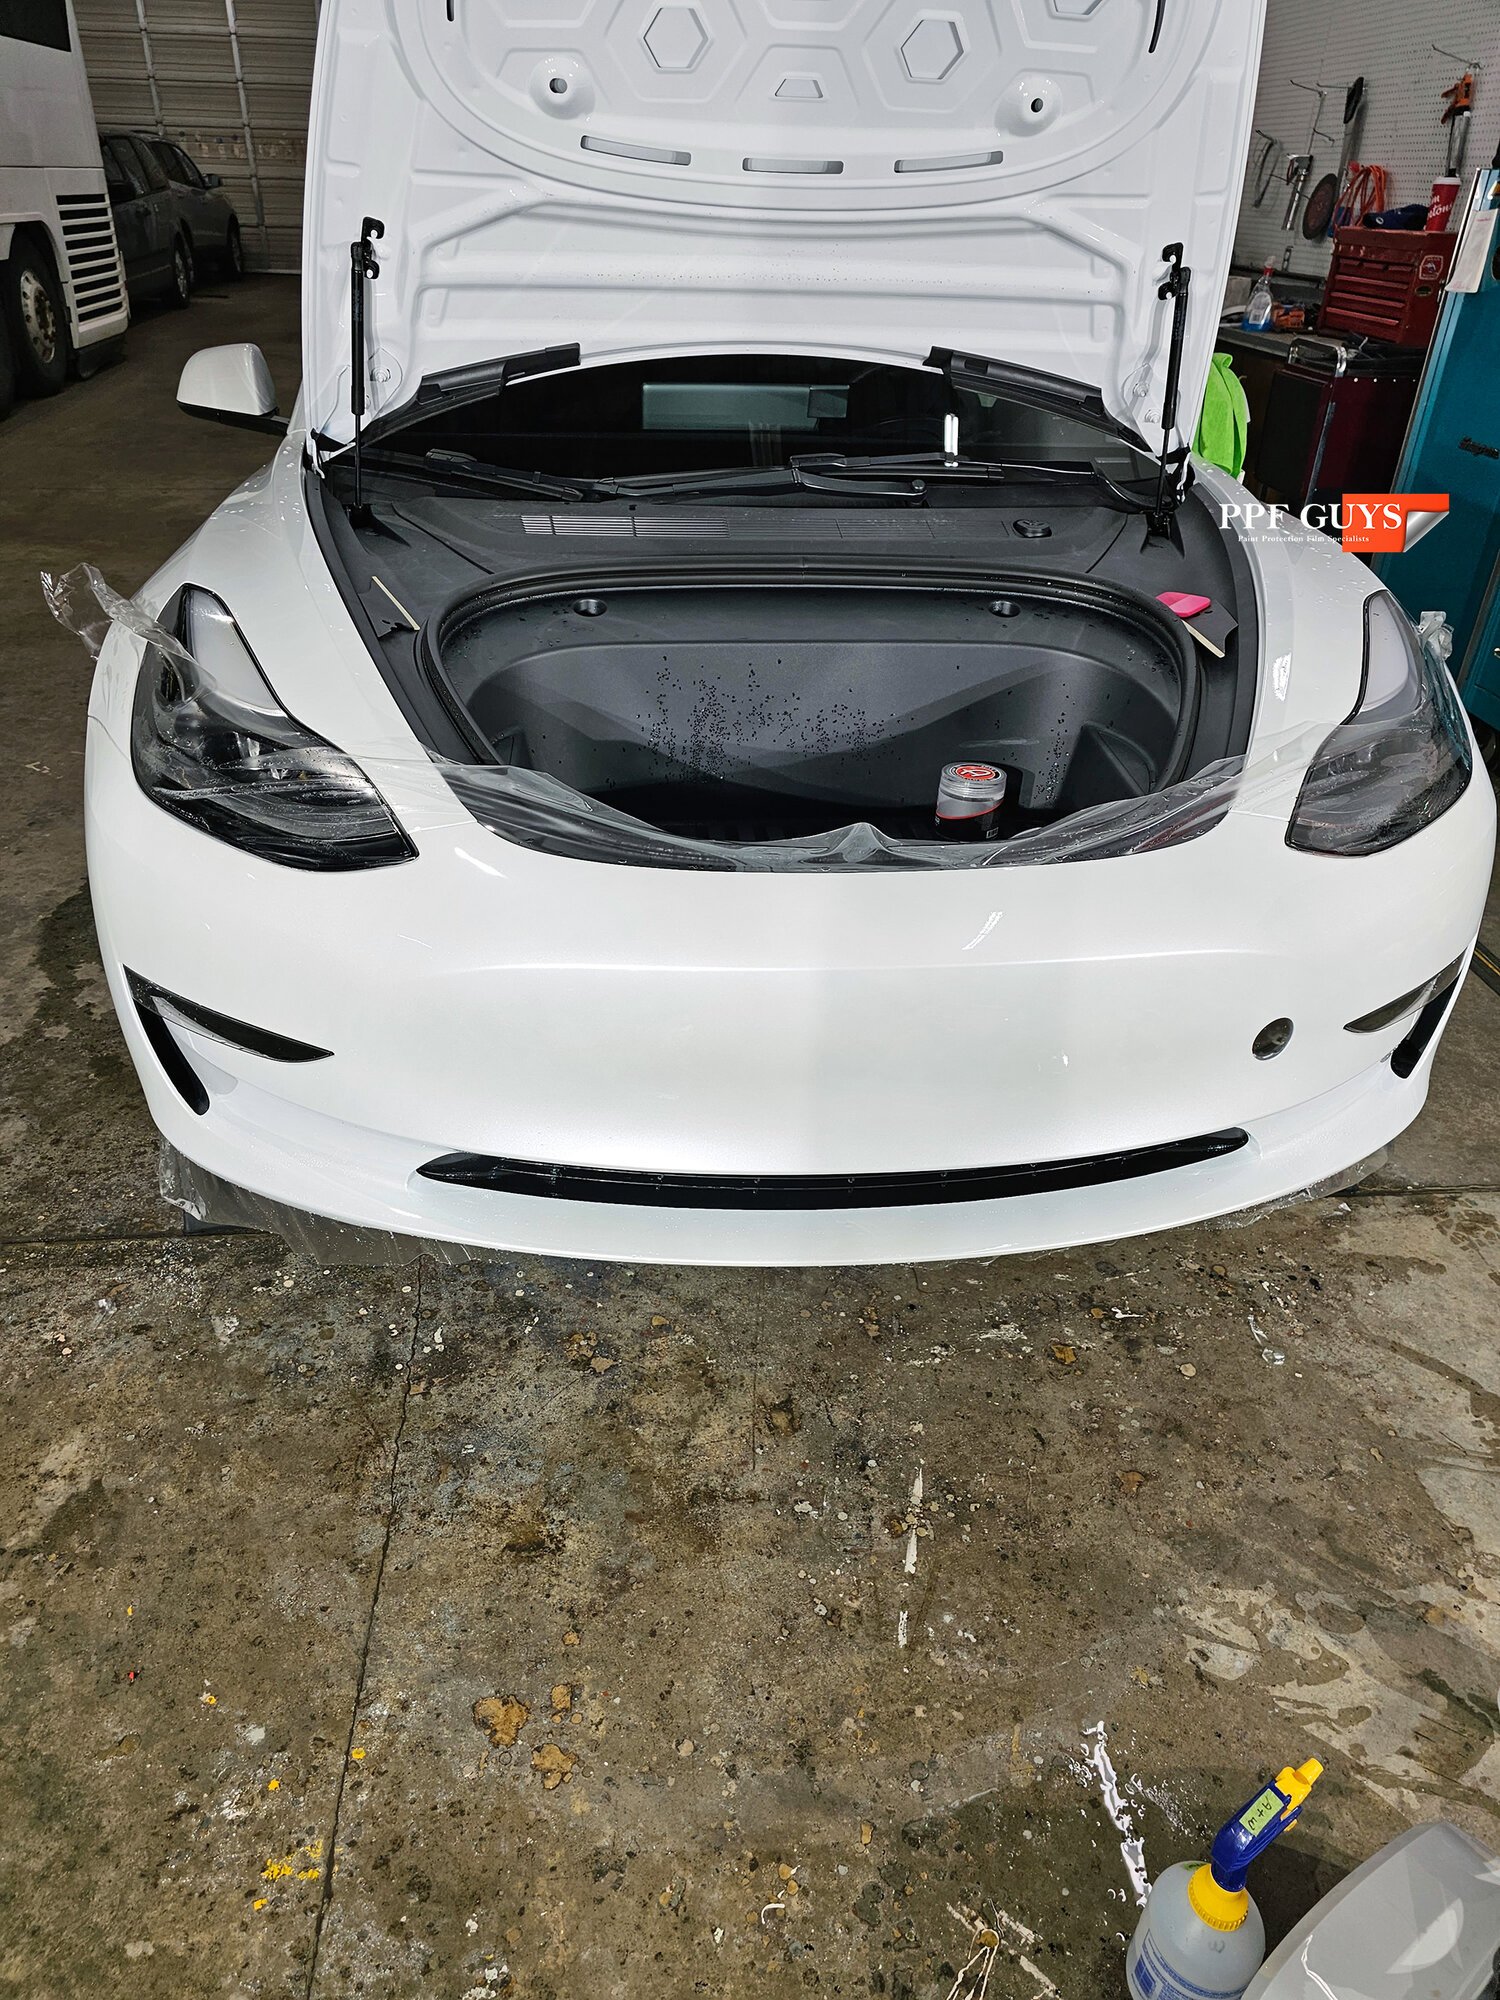 PPF Guys Model 3 White. PPF Bumper scraped and Replacement (10).jpg